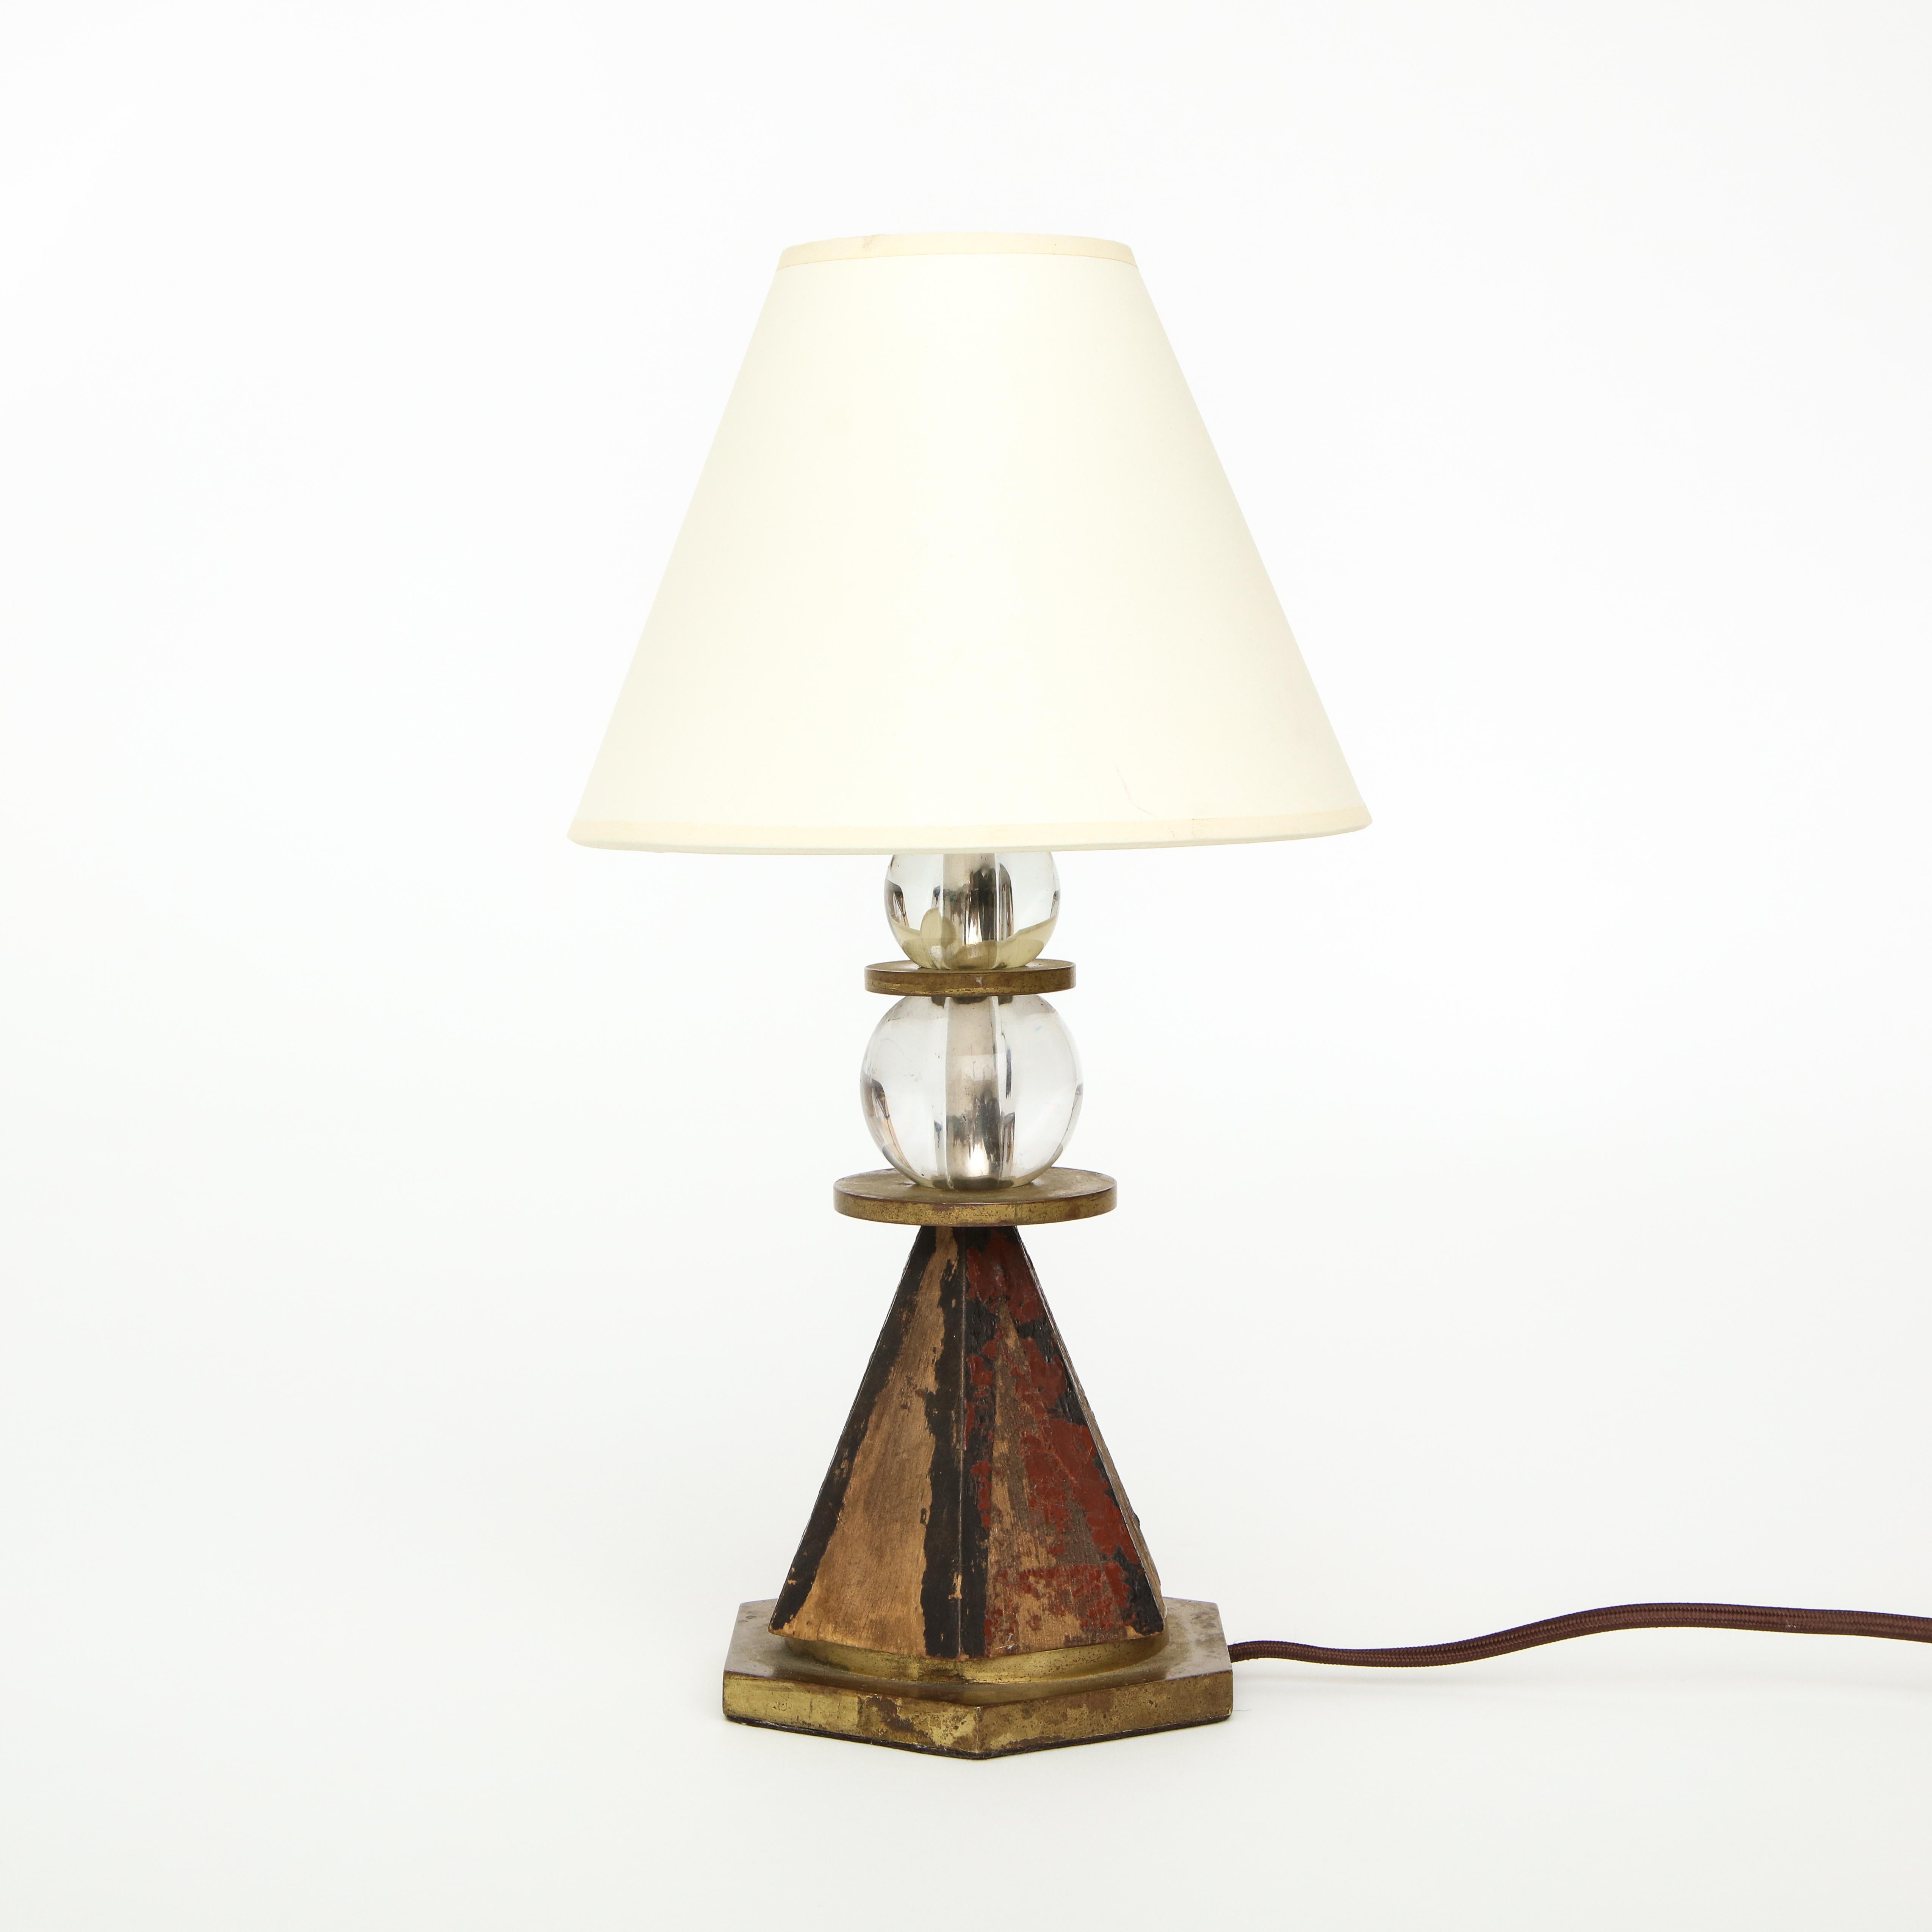 Mid-20th Century French 1930s Painted Wood Crystal Table Lamp For Sale